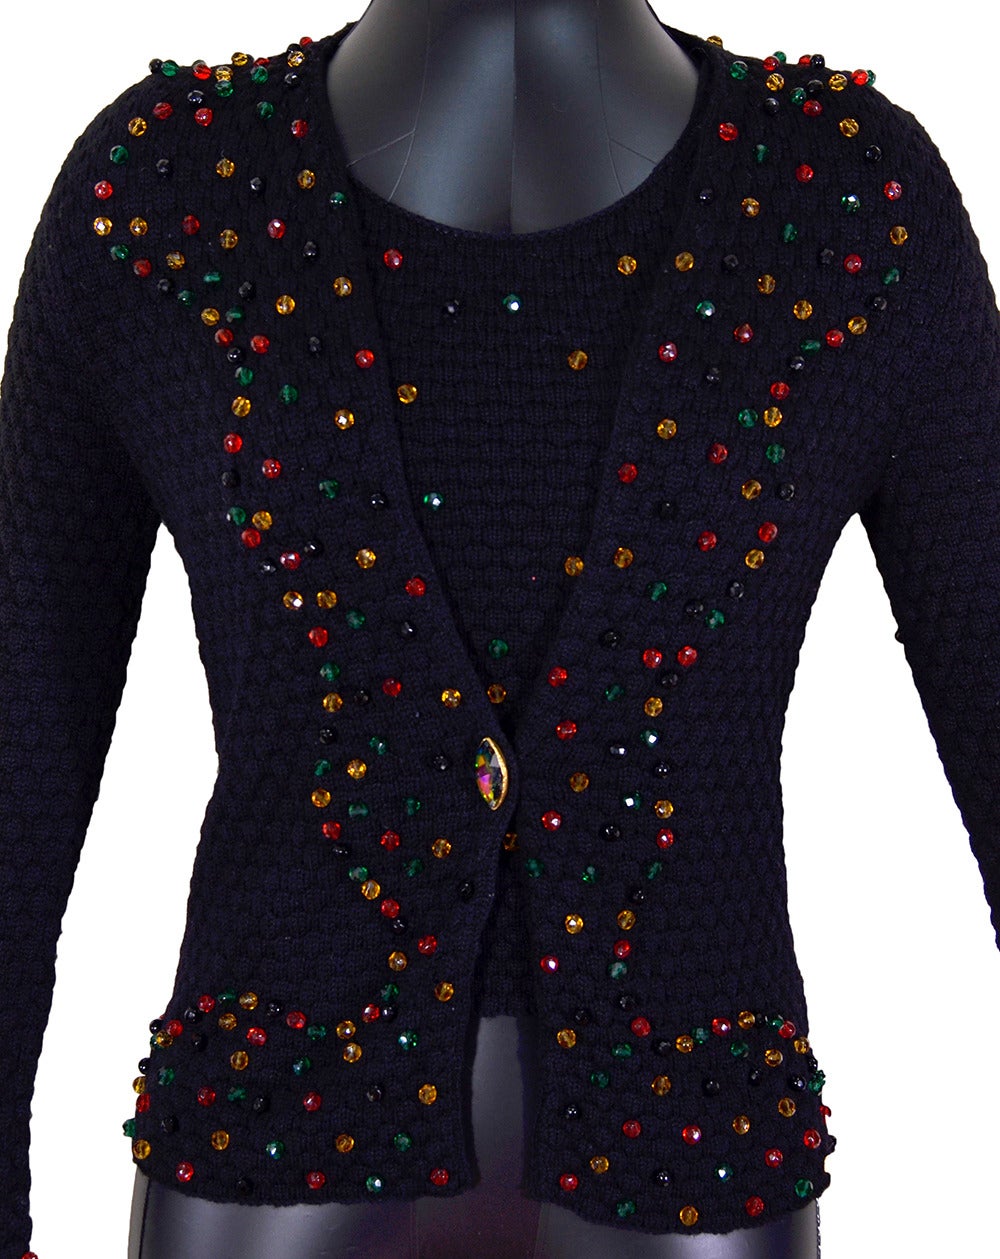 Stunning Yves Saint Laurent YSL Beaded Sweater Set In Excellent Condition For Sale In Teaneck, NJ